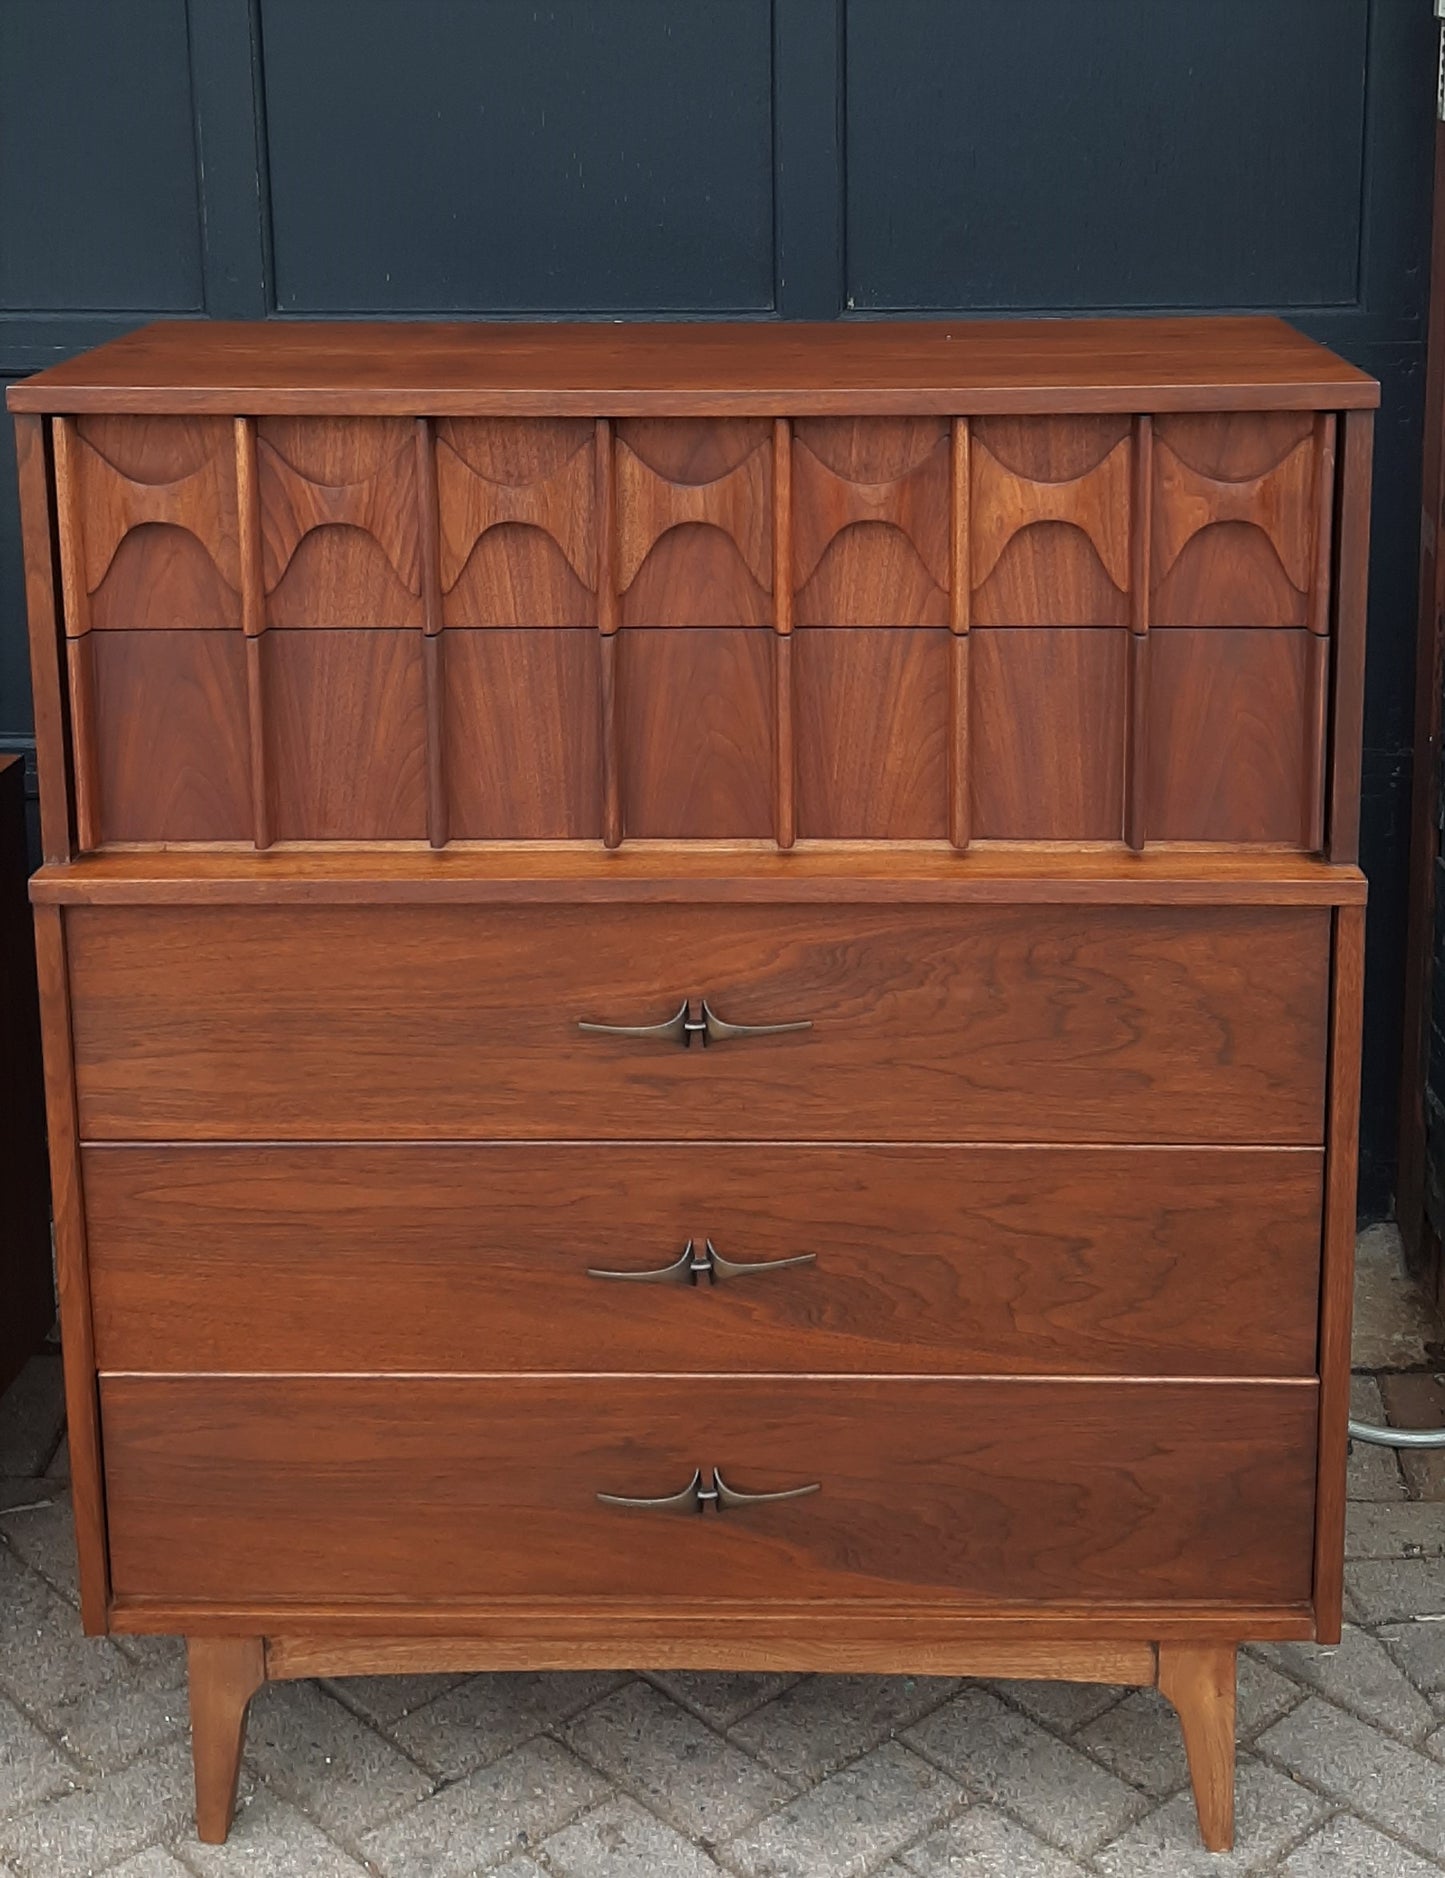 REFINISHED MCM Walnut Set of Dresser 9 drawers and Tallboy, PERFECT